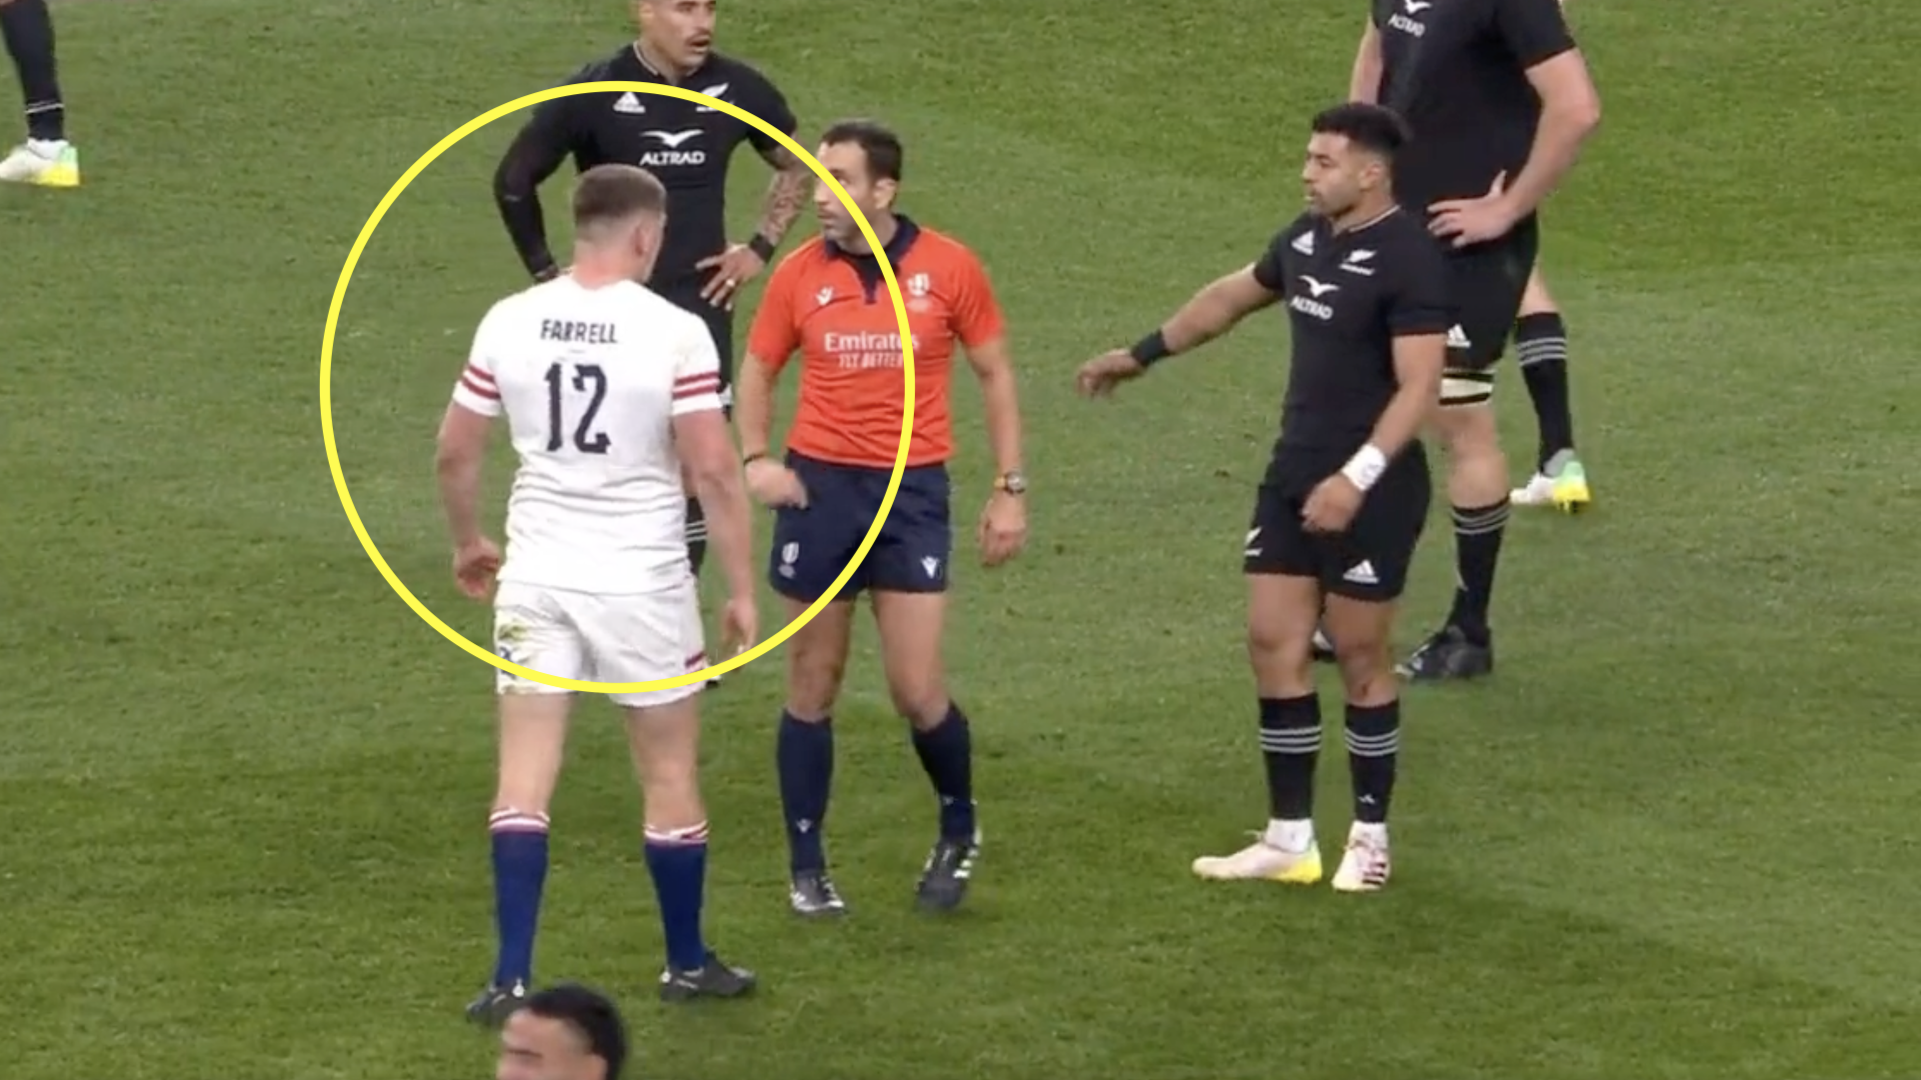 Owen Farrell shuts down Richie Mo'unga right in front of Raynal